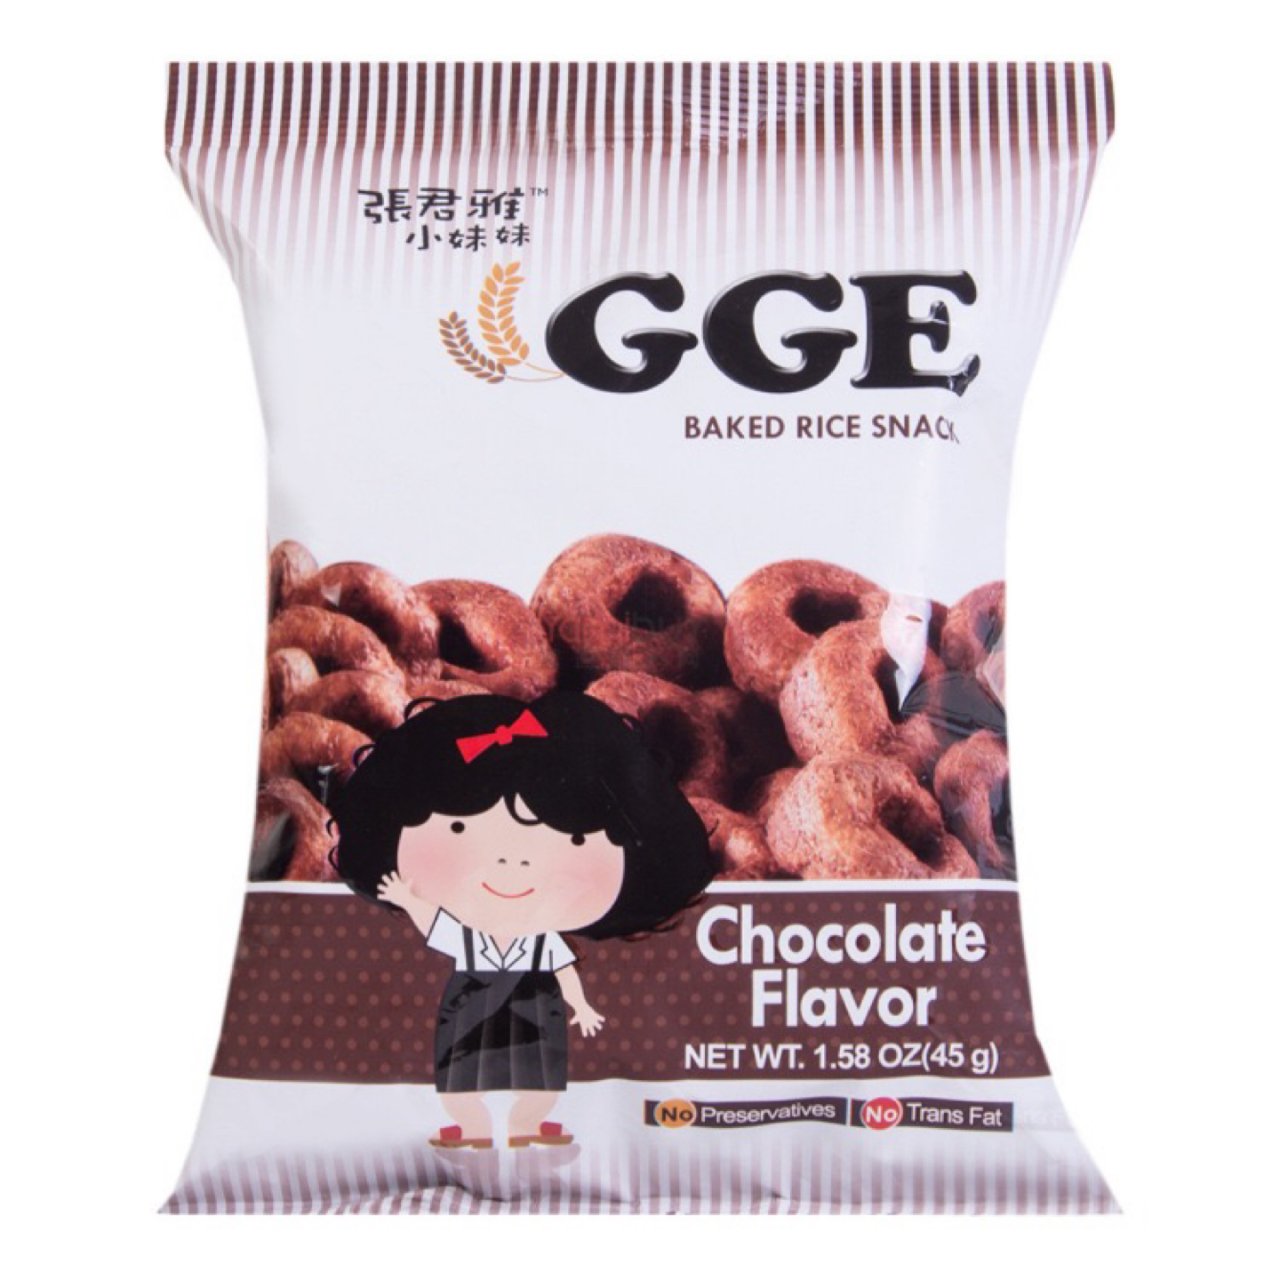 WEILIH GGE Baked Rice Snack Chocolate Fl